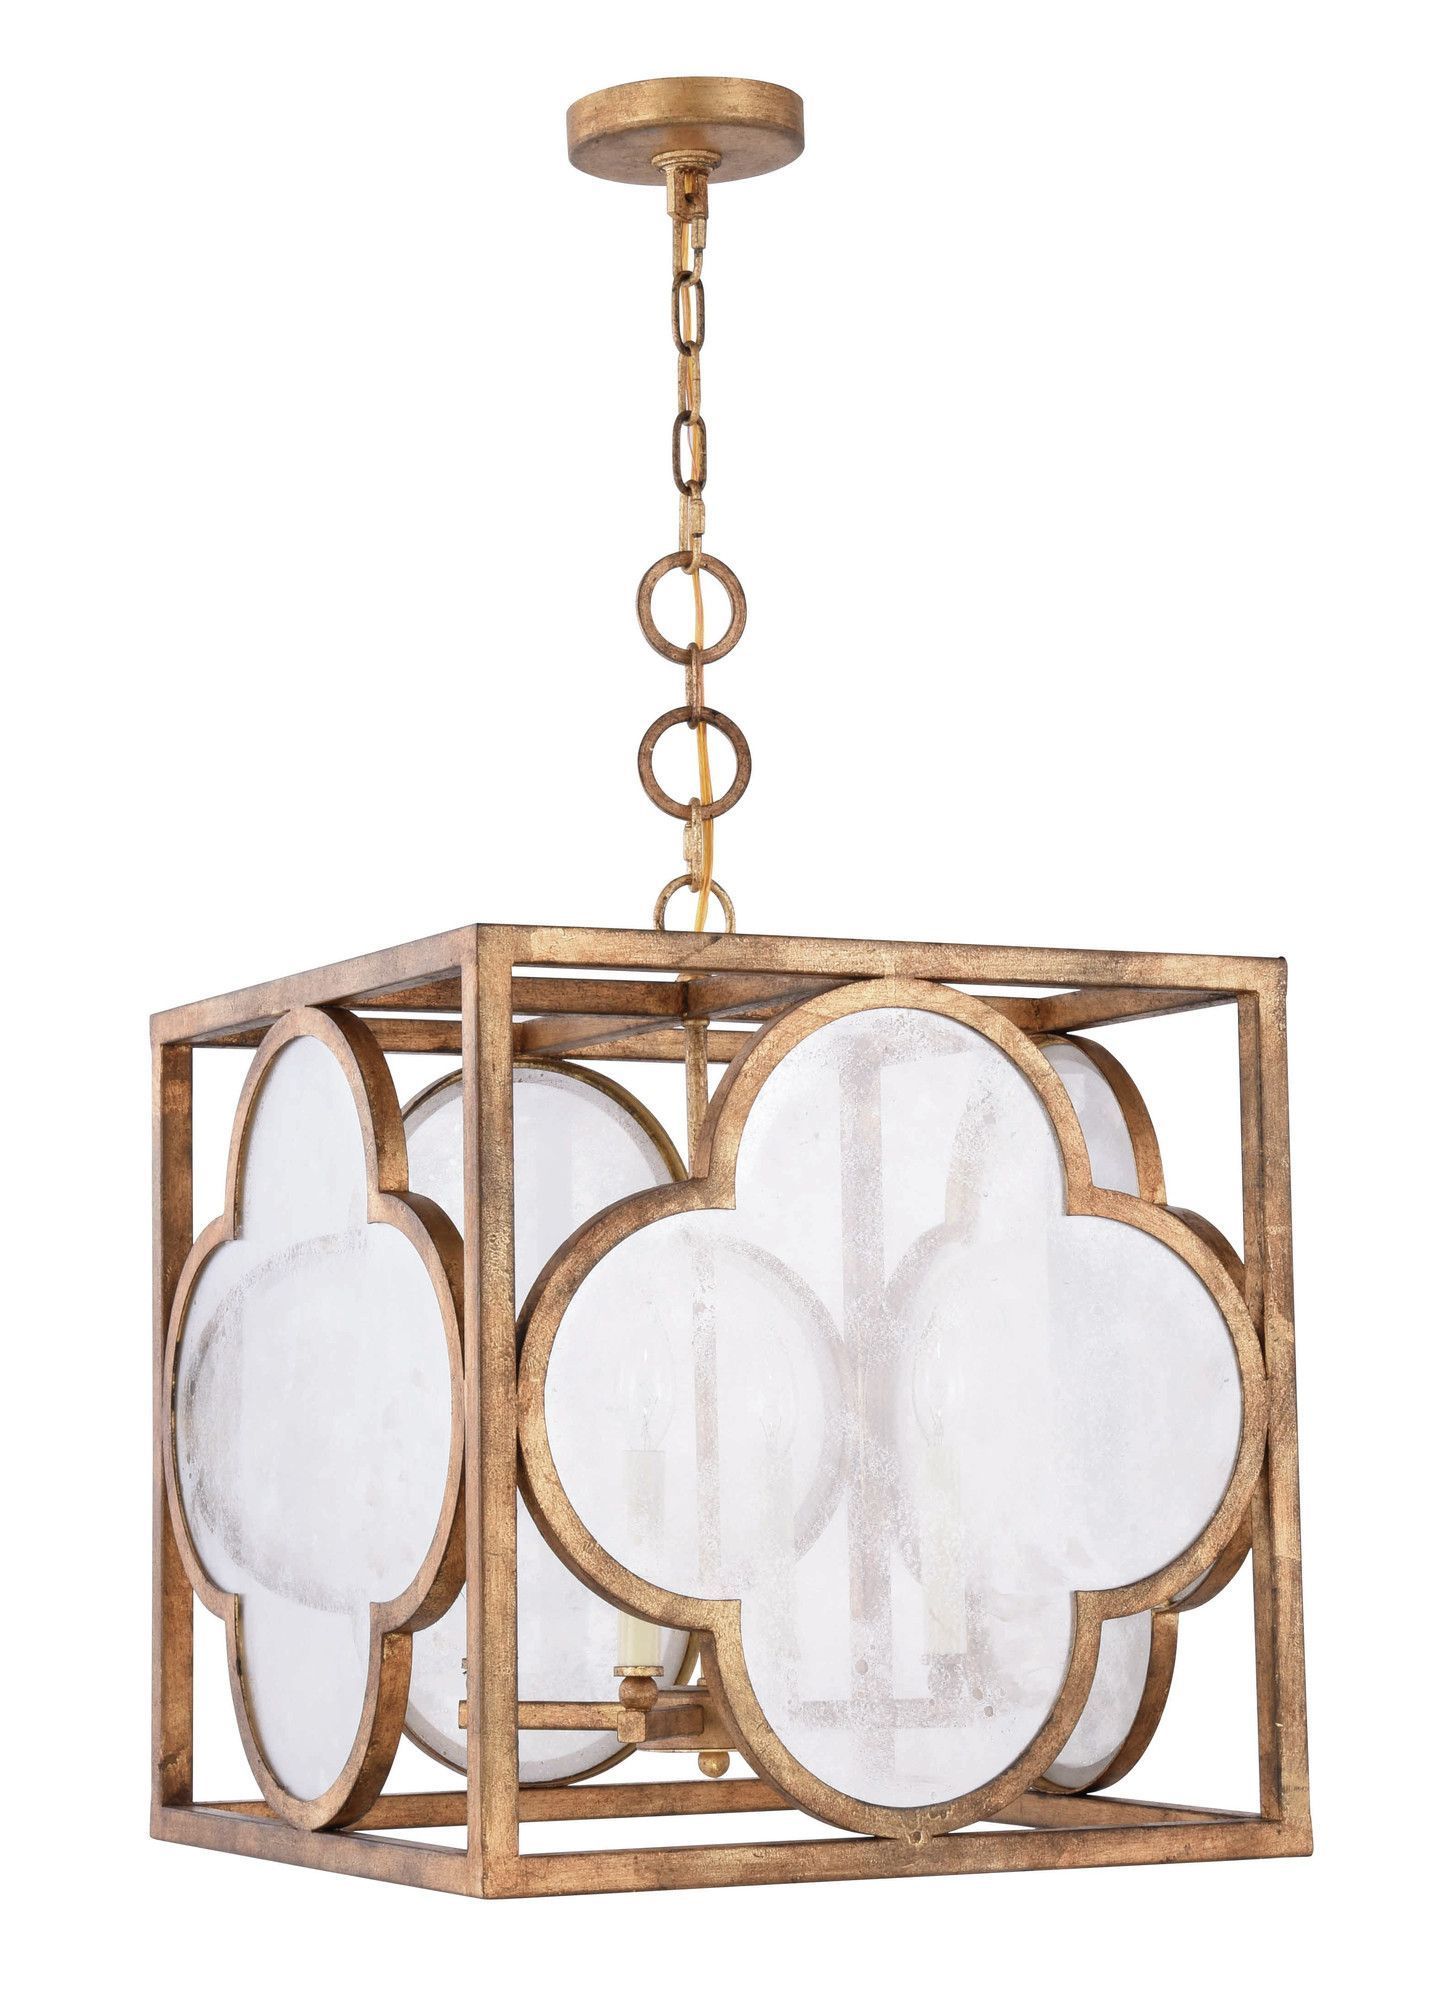 Trinity 4 Light Foyer Pendant | Products | Pendant Lighting Throughout Tiana 4 Light Geometric Chandeliers (View 12 of 30)